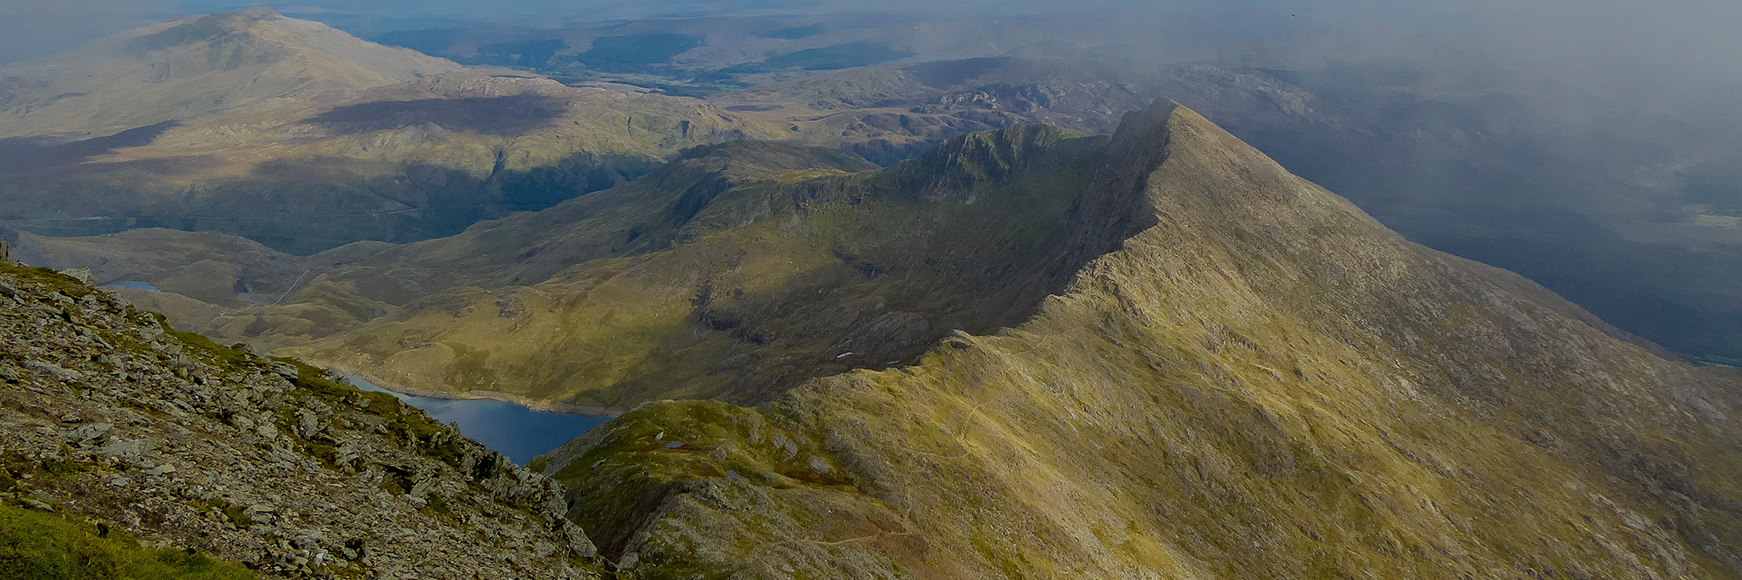 Snowdon: Routes to the top banner image